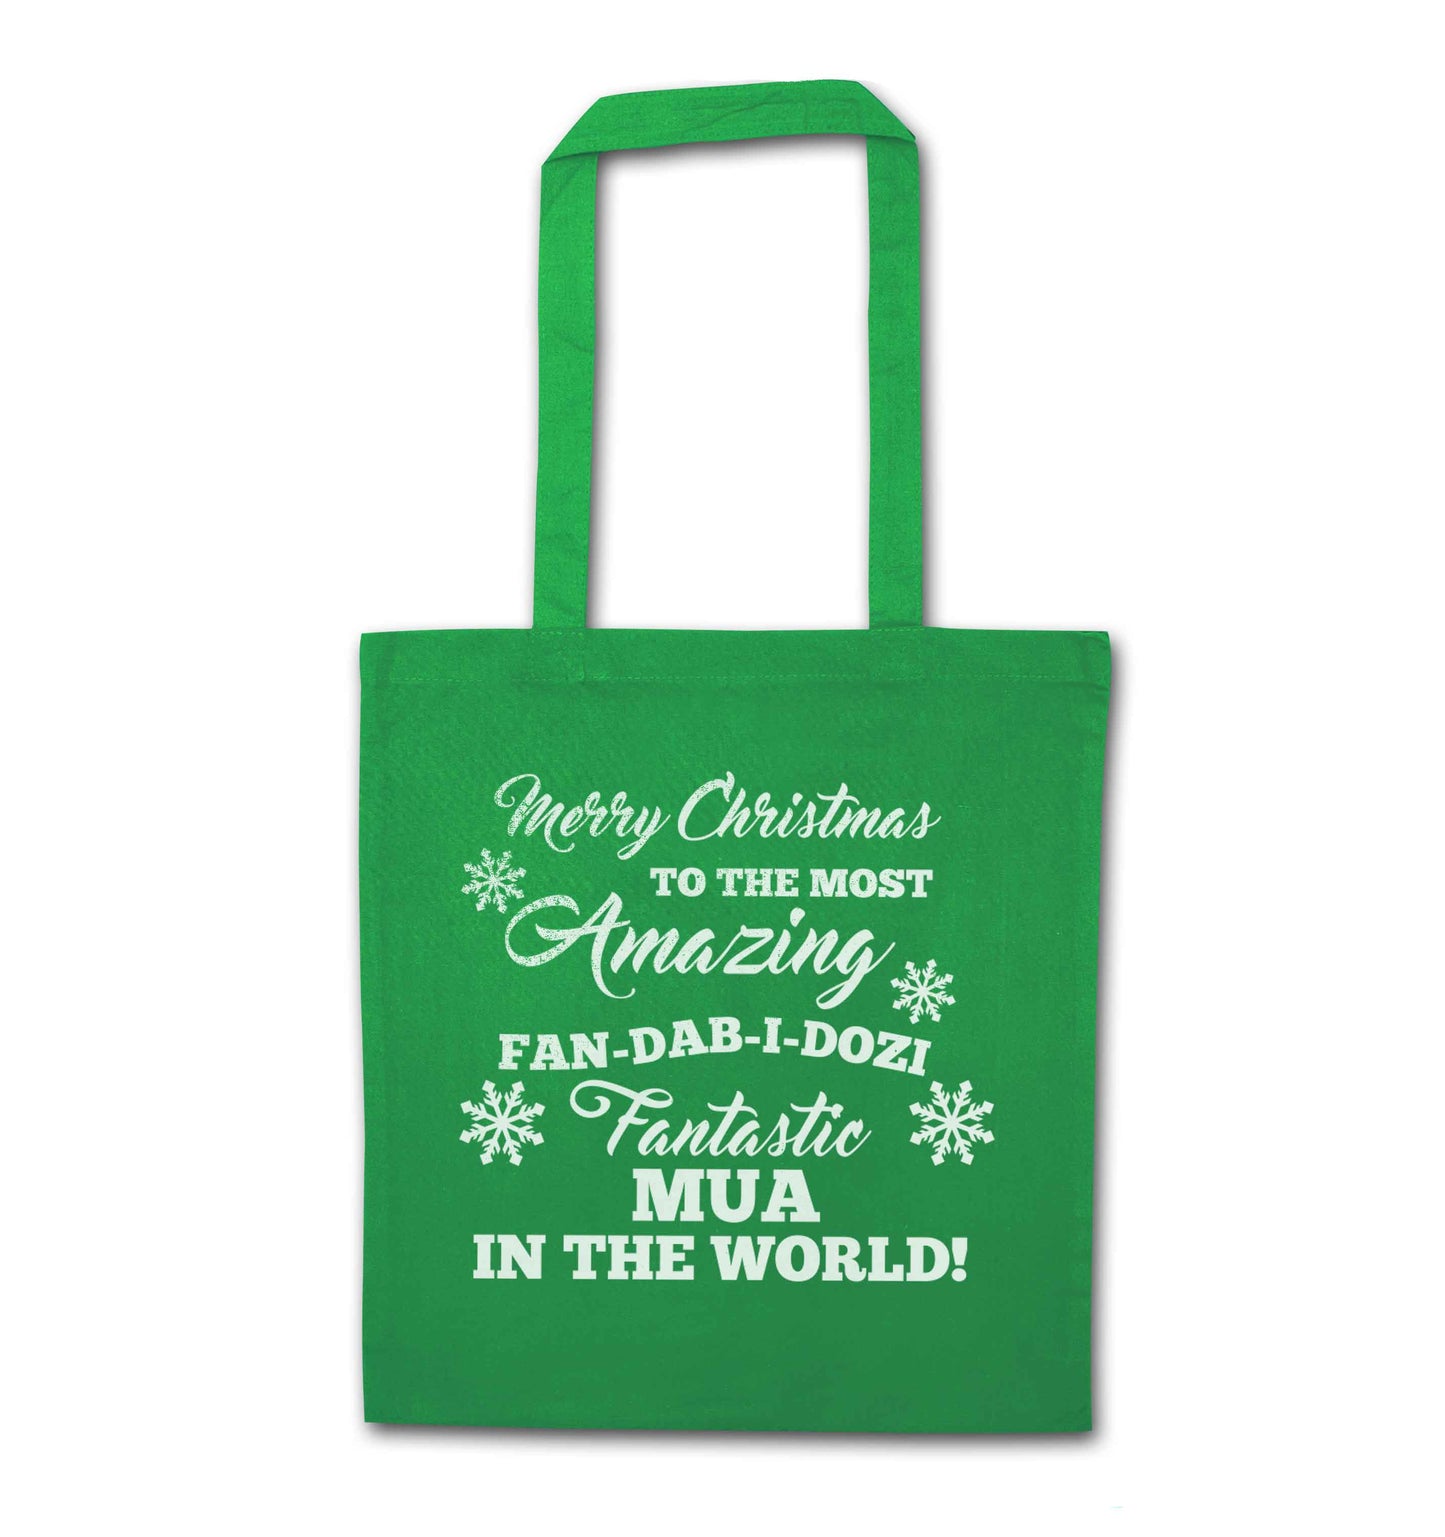 Merry Christmas to the most amazing fan-dab-i-dozi fantasic MUA in the world green tote bag